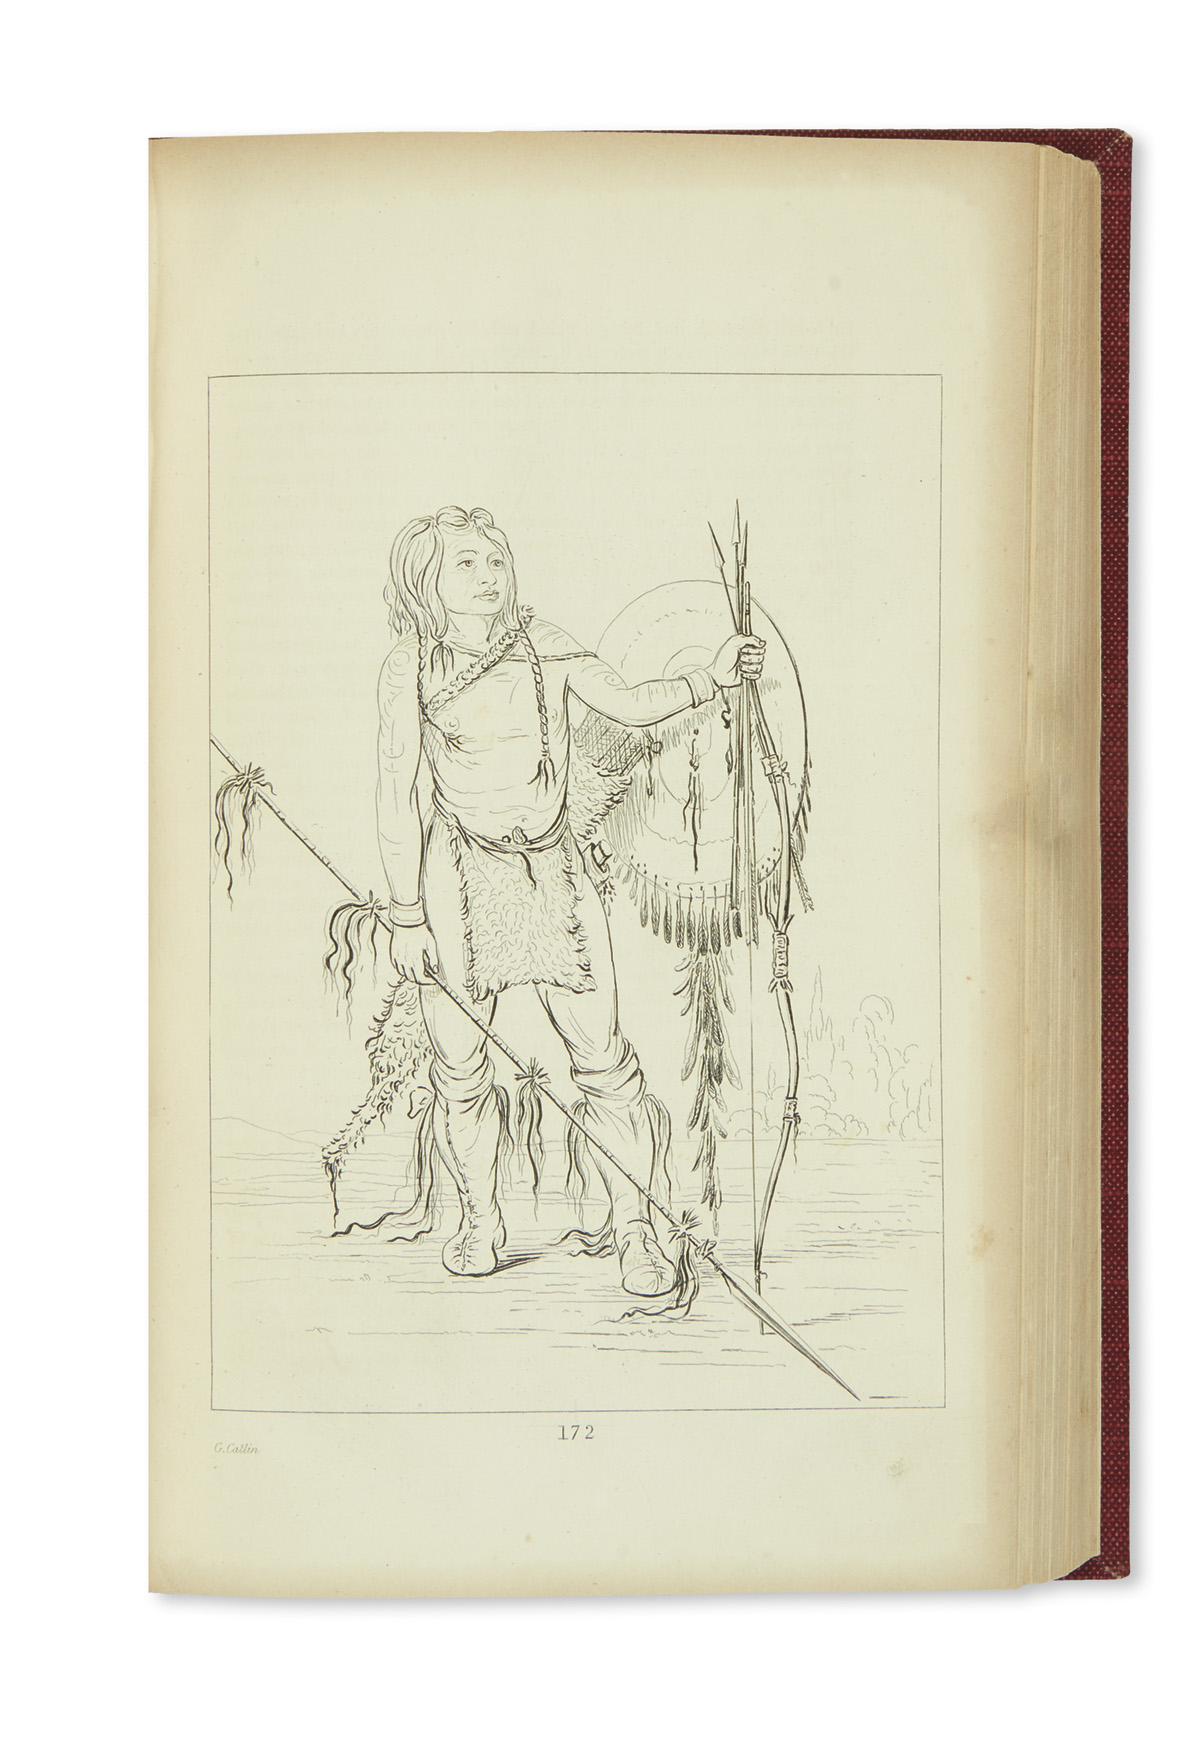 (AMERICAN INDIANS.) Catlin, George. Letters and Notes on the Manners, Customs, and Condition of the North American Indians.